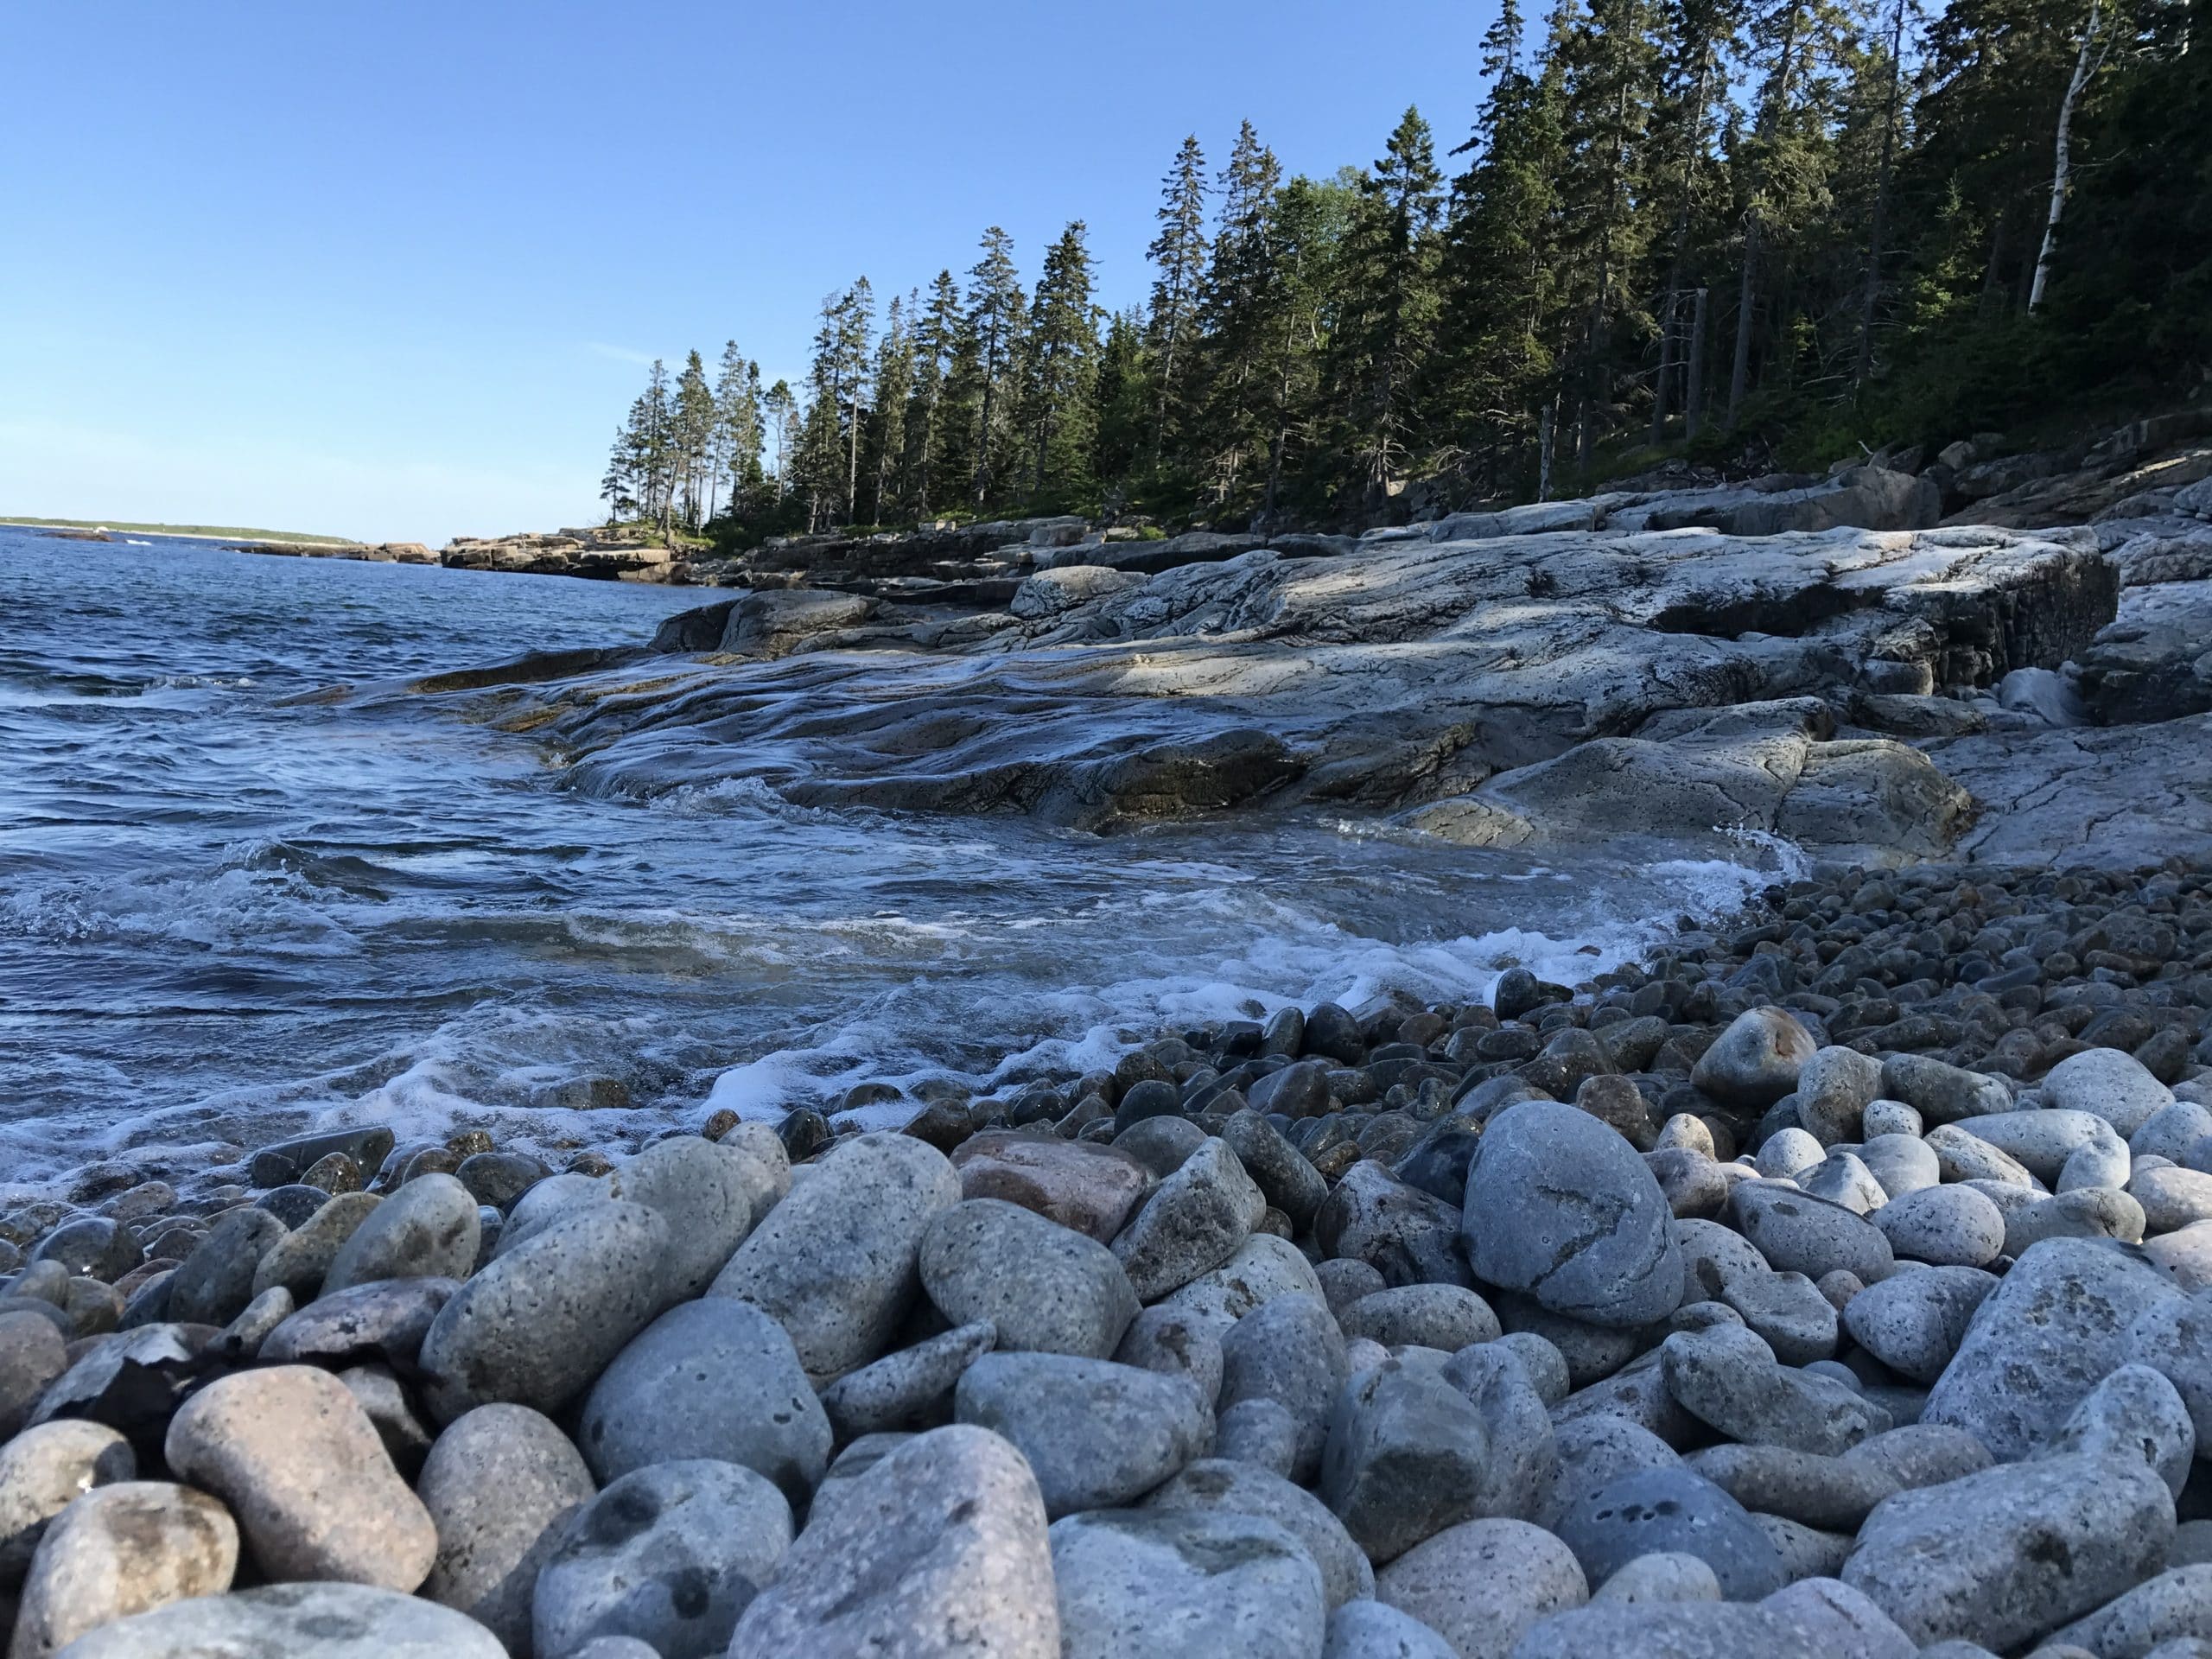 Schoodic Peninsula Complete Guide: The Quiet Side Of Acadia